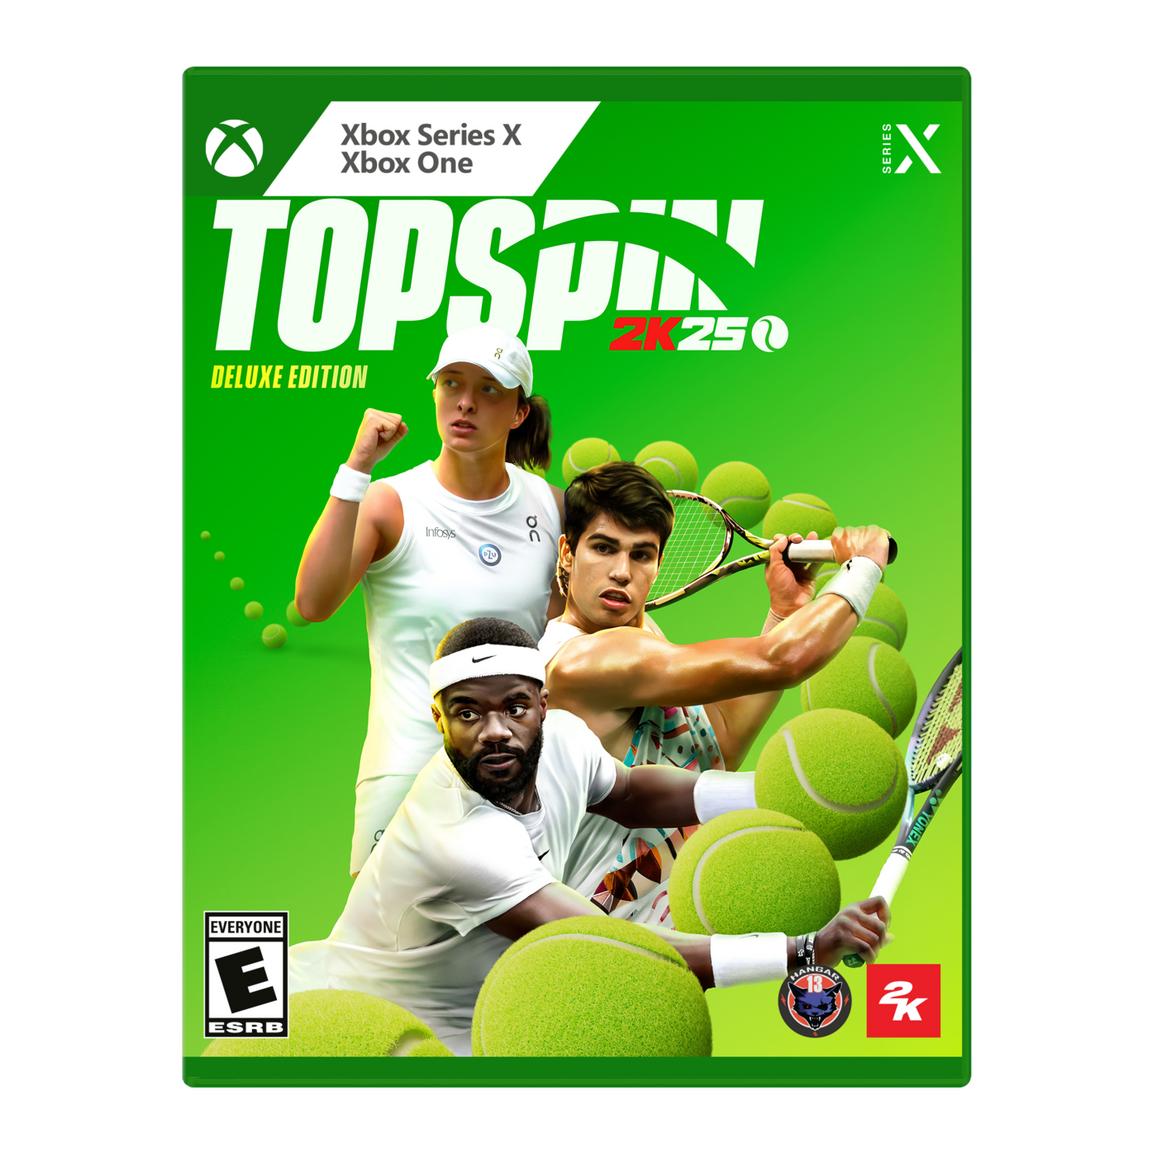 Видеоигра TopSpin 2K25 Deluxe Edition - Xbox Series X, Xbox One wolfenstein youngblood deluxe edition xbox one series x